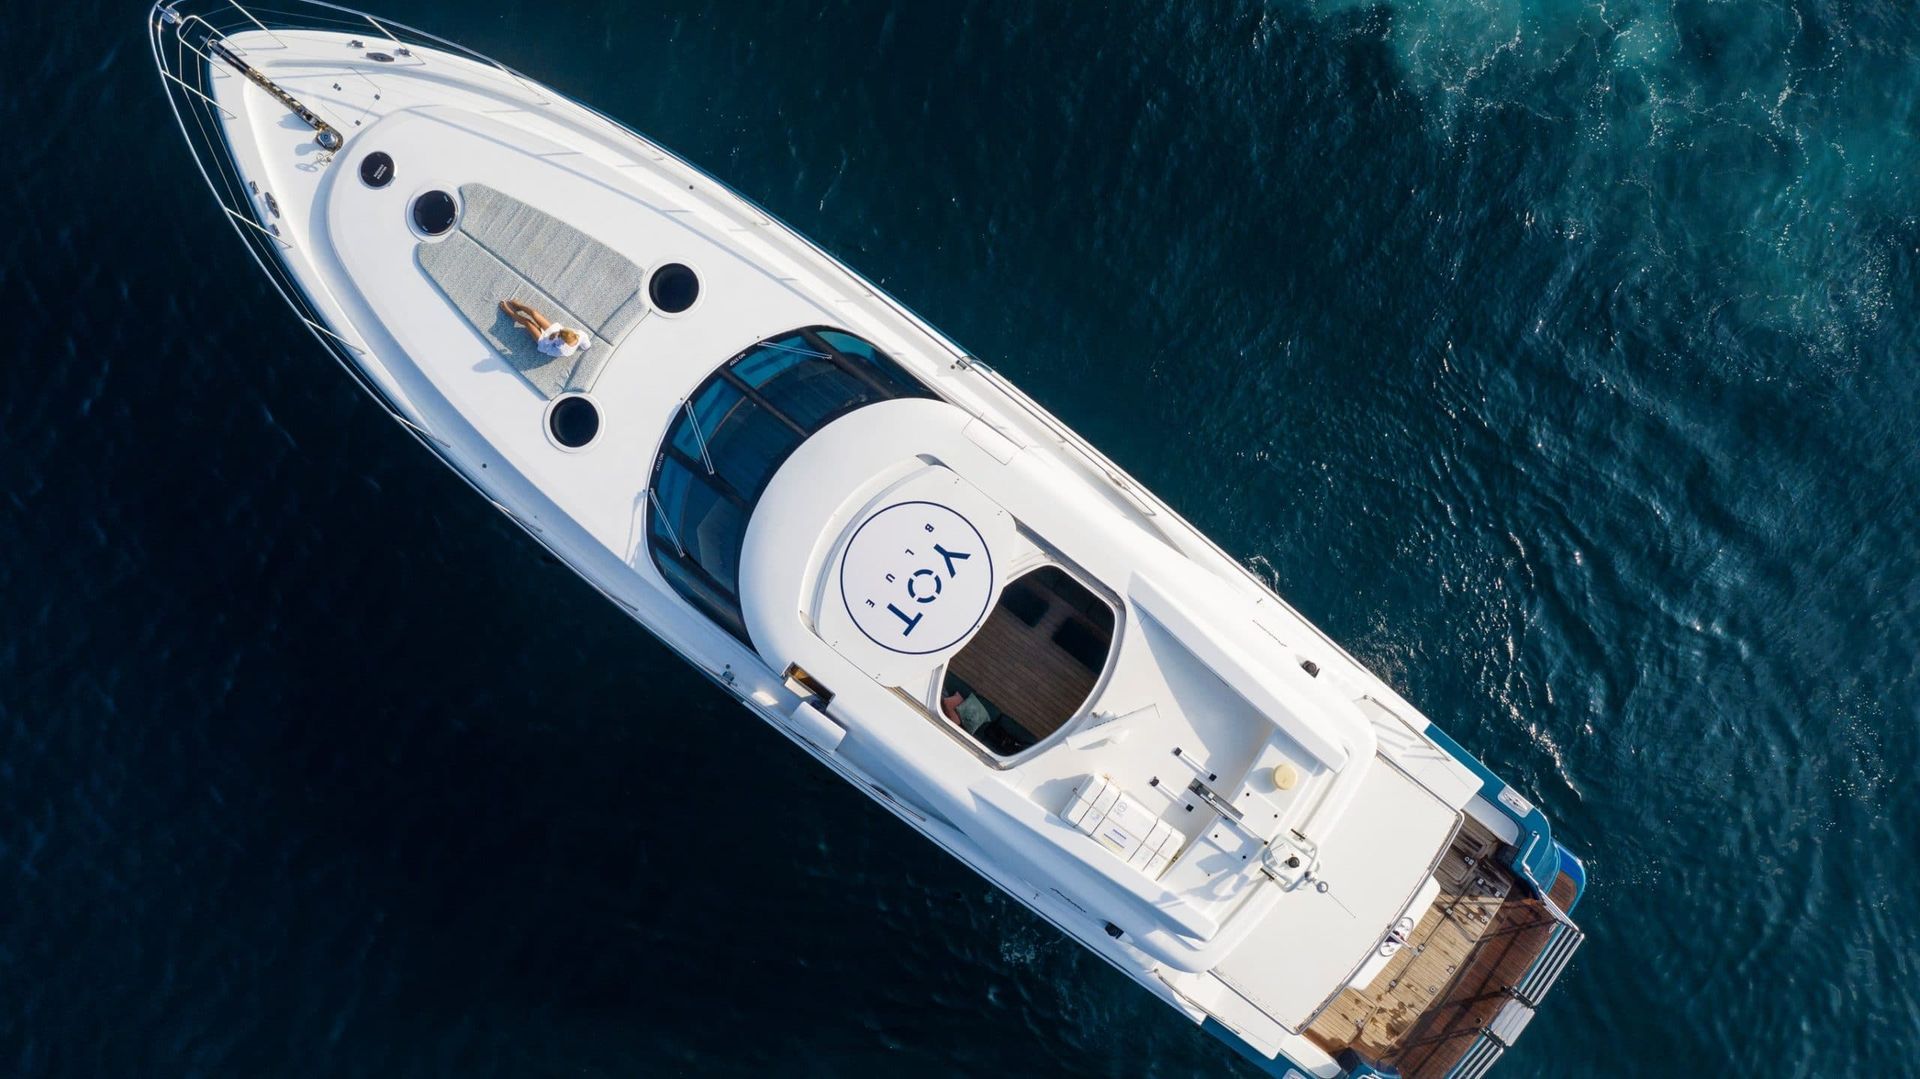 YOT BLUE | From $1,250 Per Hour | 58 Guests